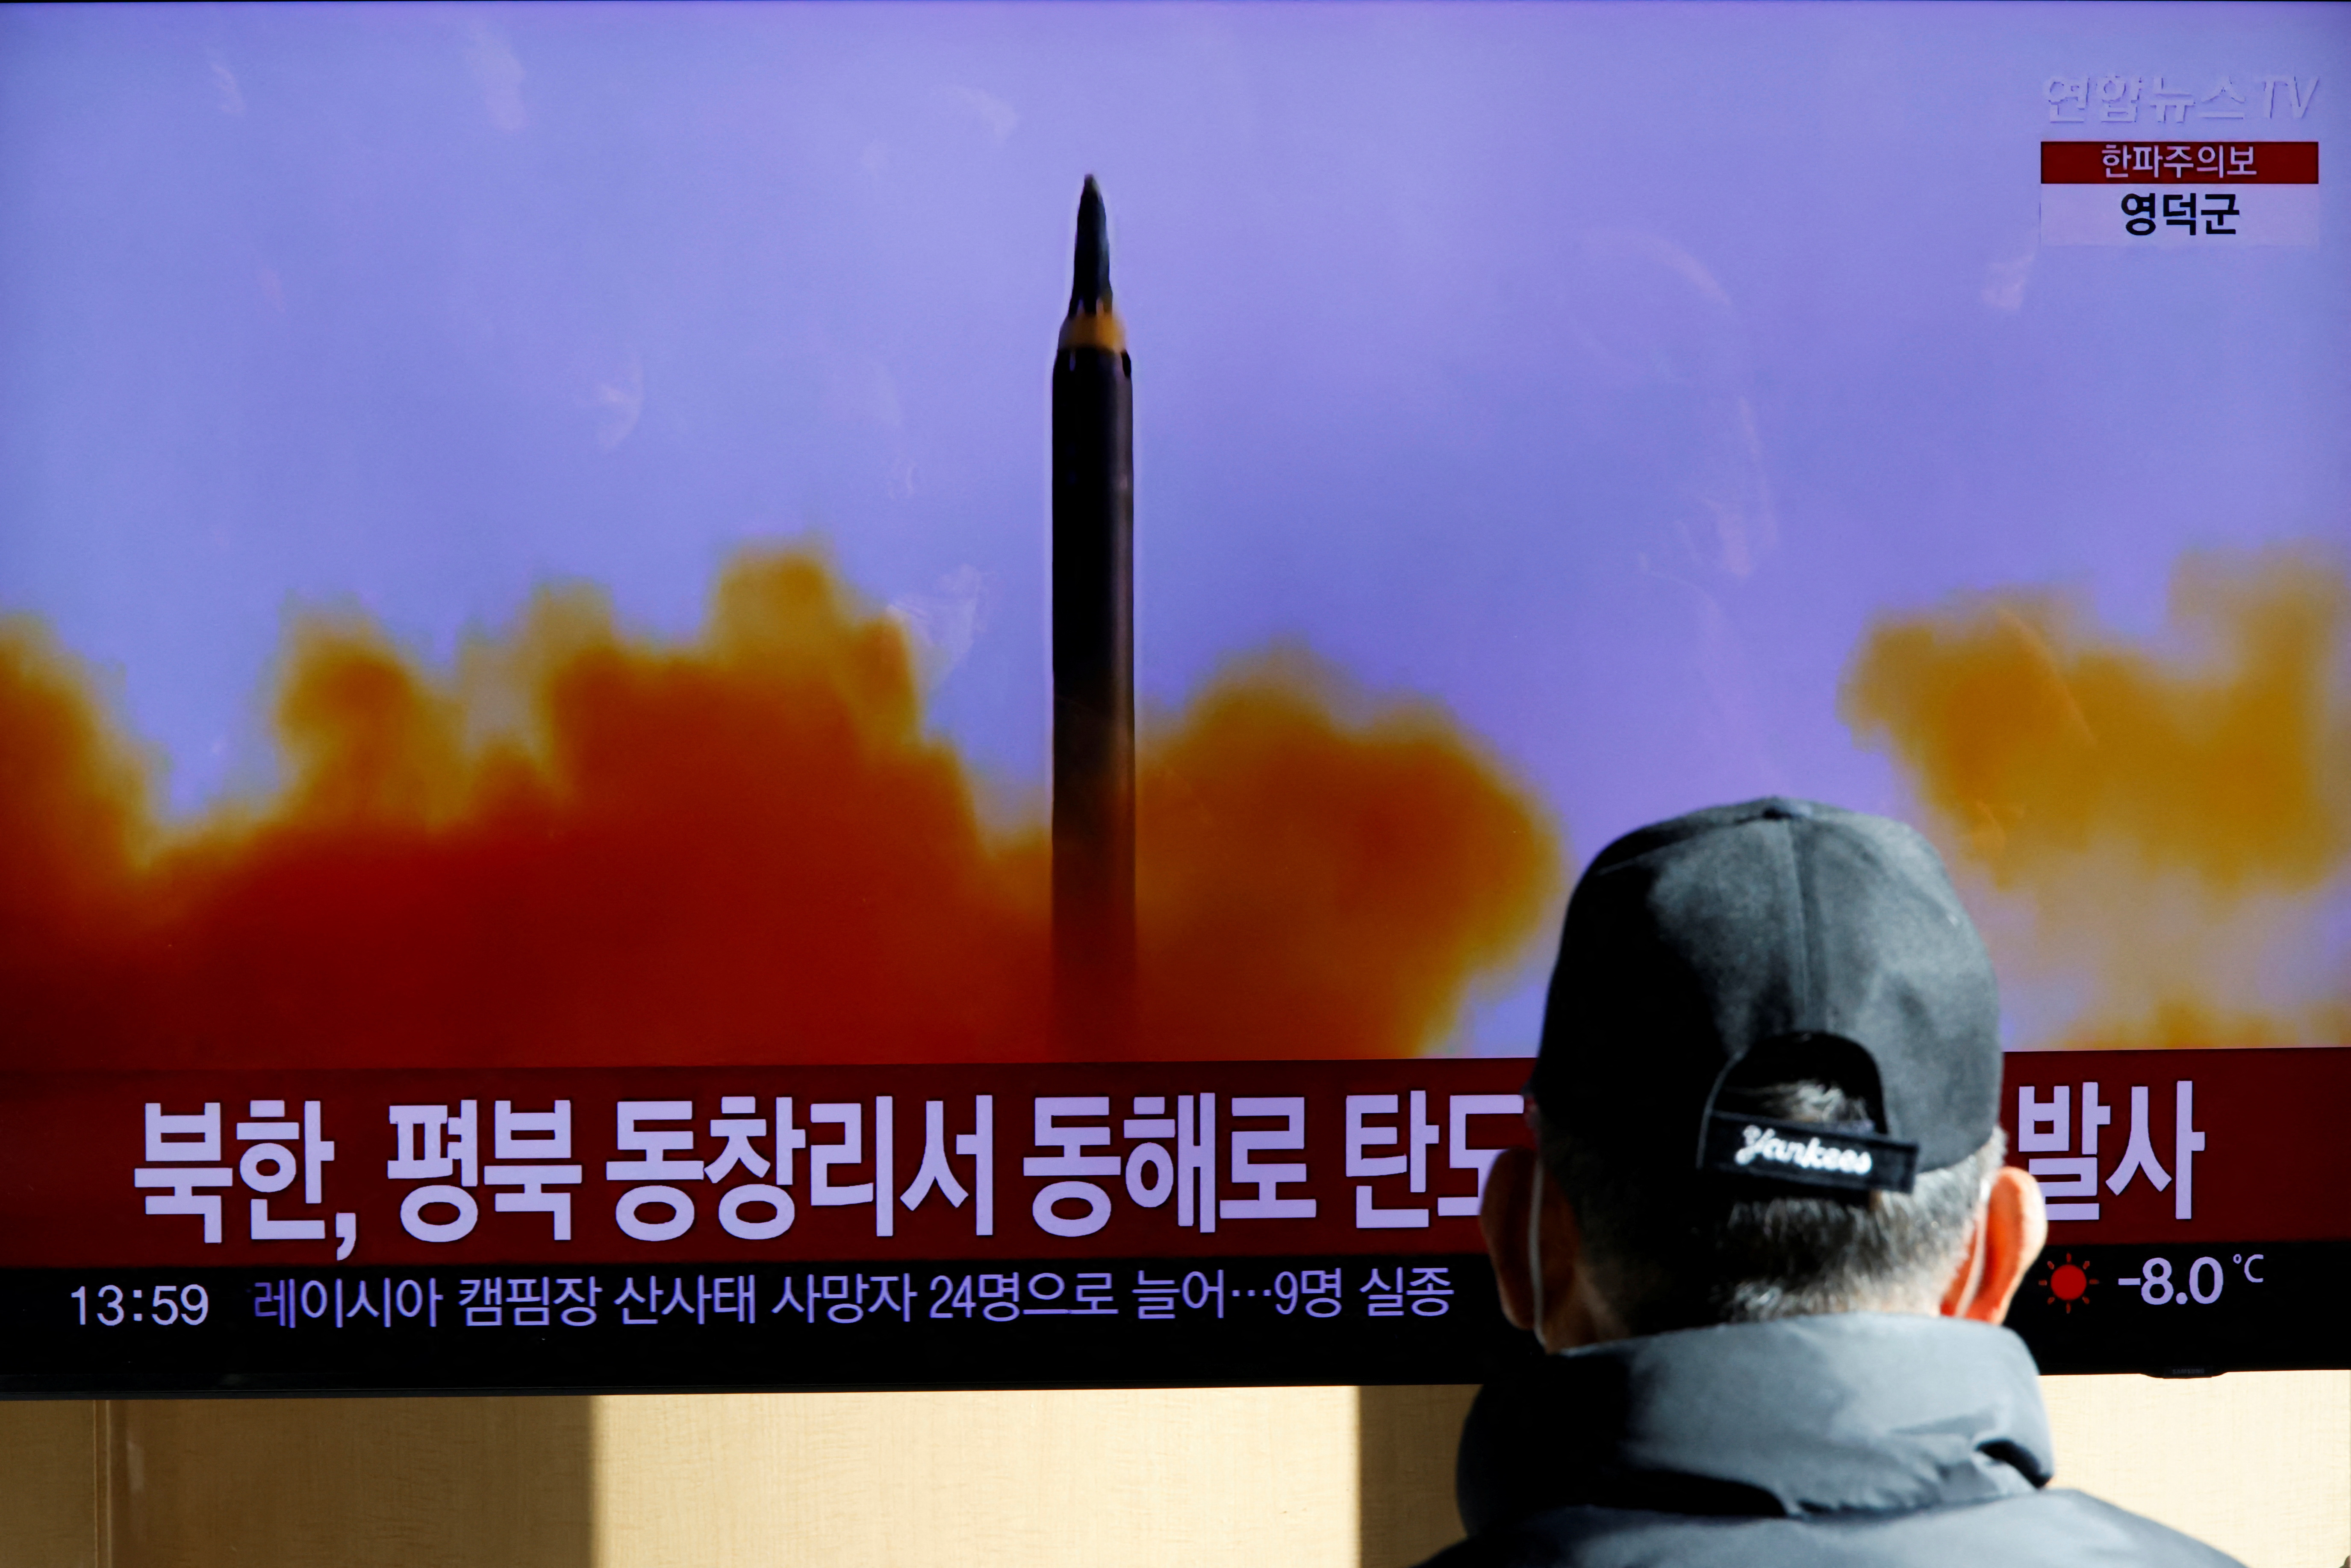 A man watches a TV broadcasting a news report on North Korea firing a ballistic missile off its east coast, in Seoul